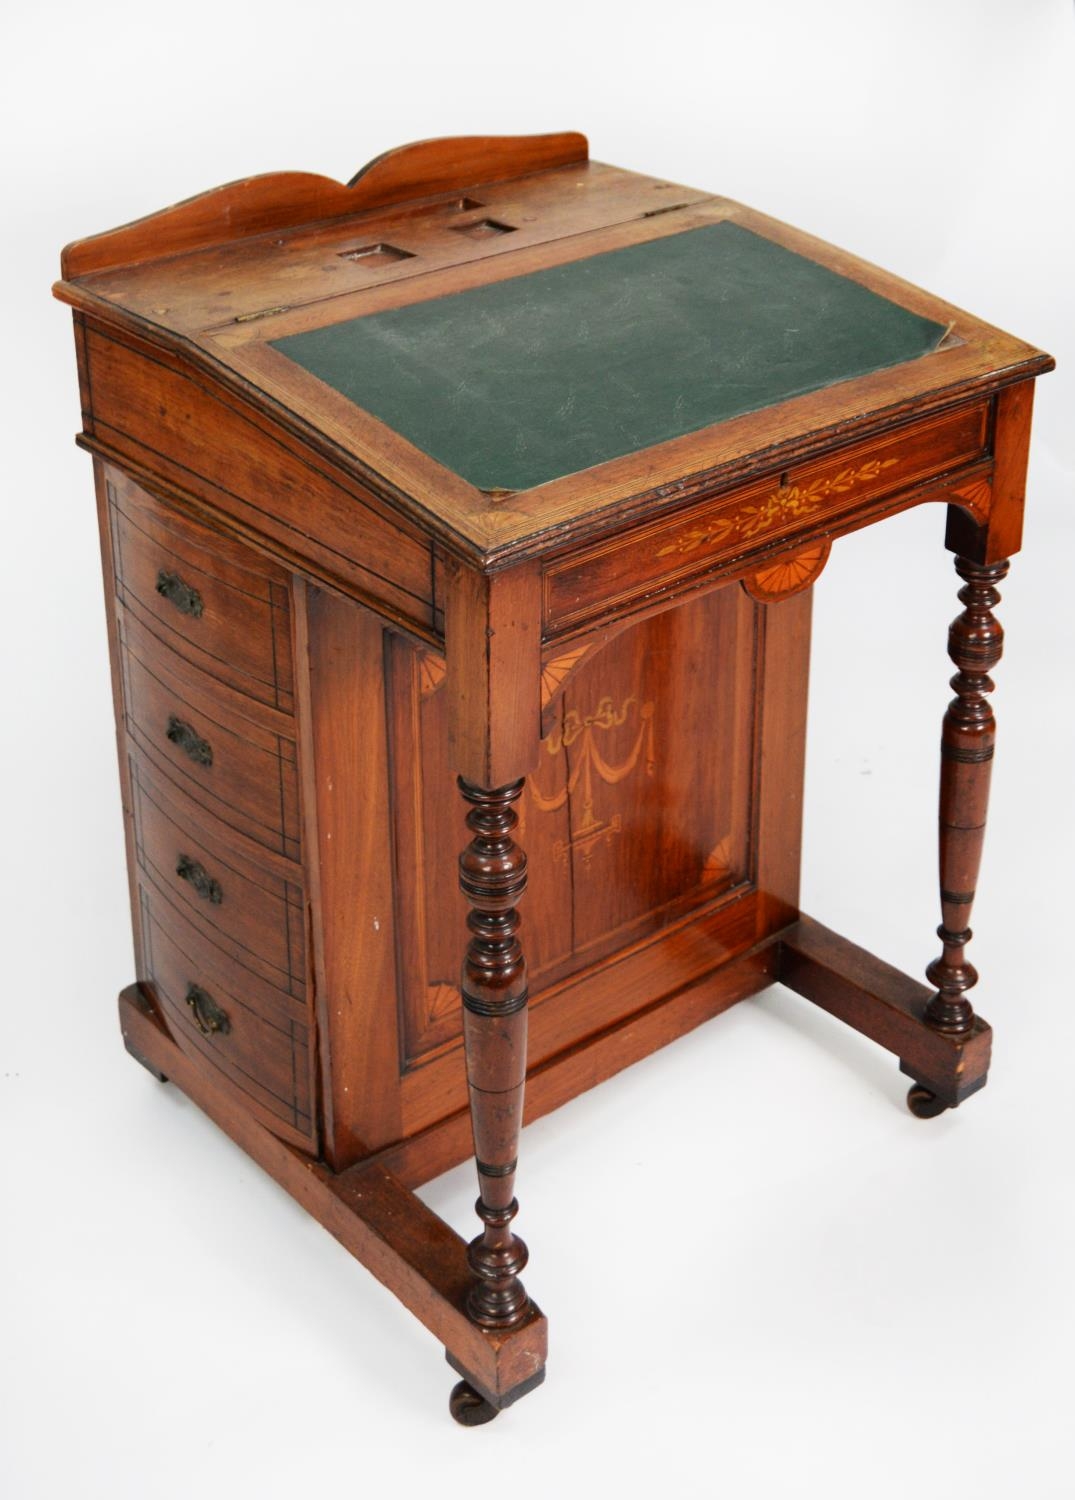 LATE NINETEENTH CENTURY INLAID WALNUT DAVENPORT DESK, with pen tray and cut outs for a pair of